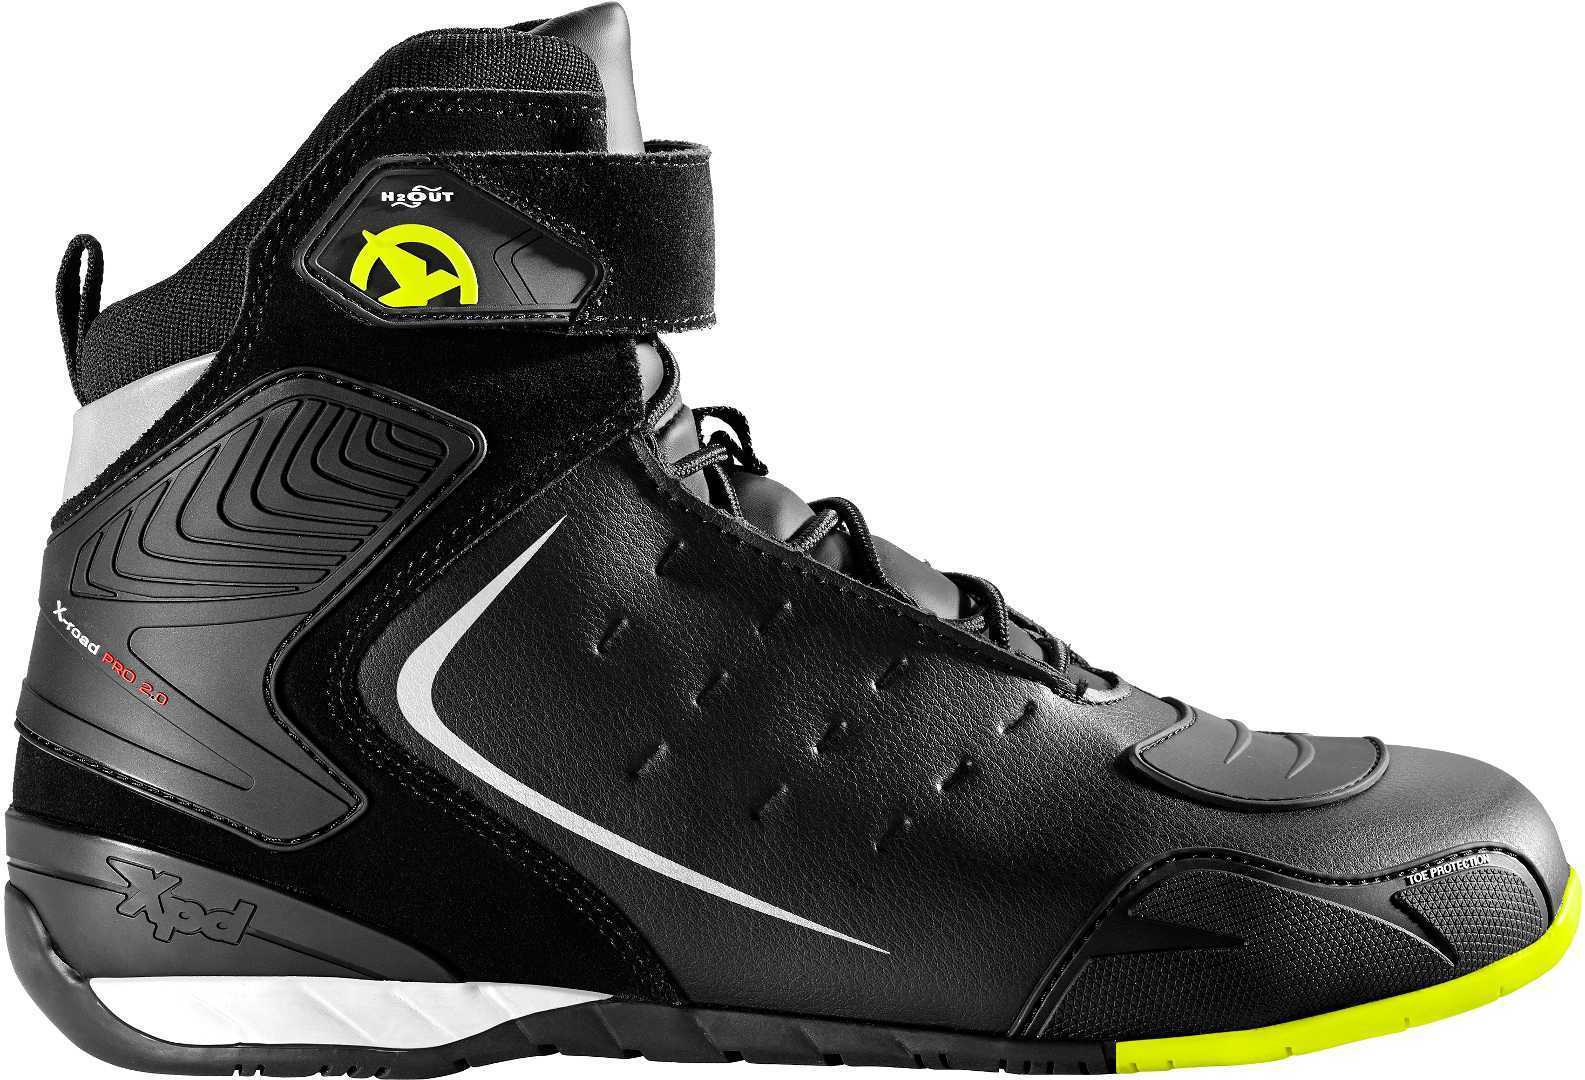 Image of XPD X-Road H2Out Yellow Fluo Size 43 EN